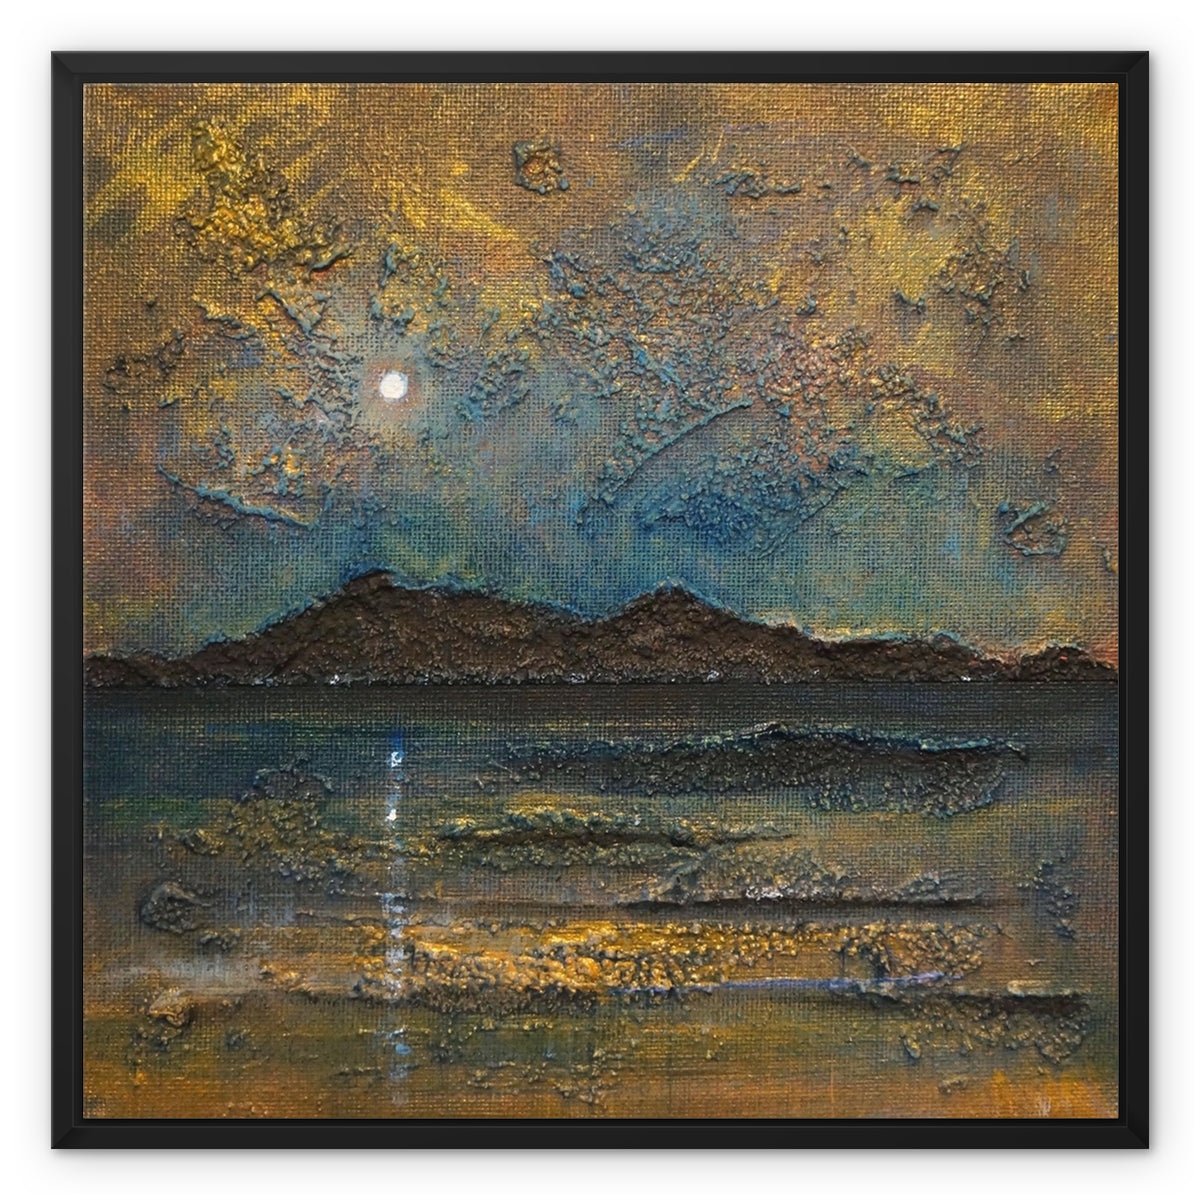 Arran Moonlight Painting | Framed Canvas From Scotland-Floating Framed Canvas Prints-Arran Art Gallery-24"x24"-Black Frame-Paintings, Prints, Homeware, Art Gifts From Scotland By Scottish Artist Kevin Hunter